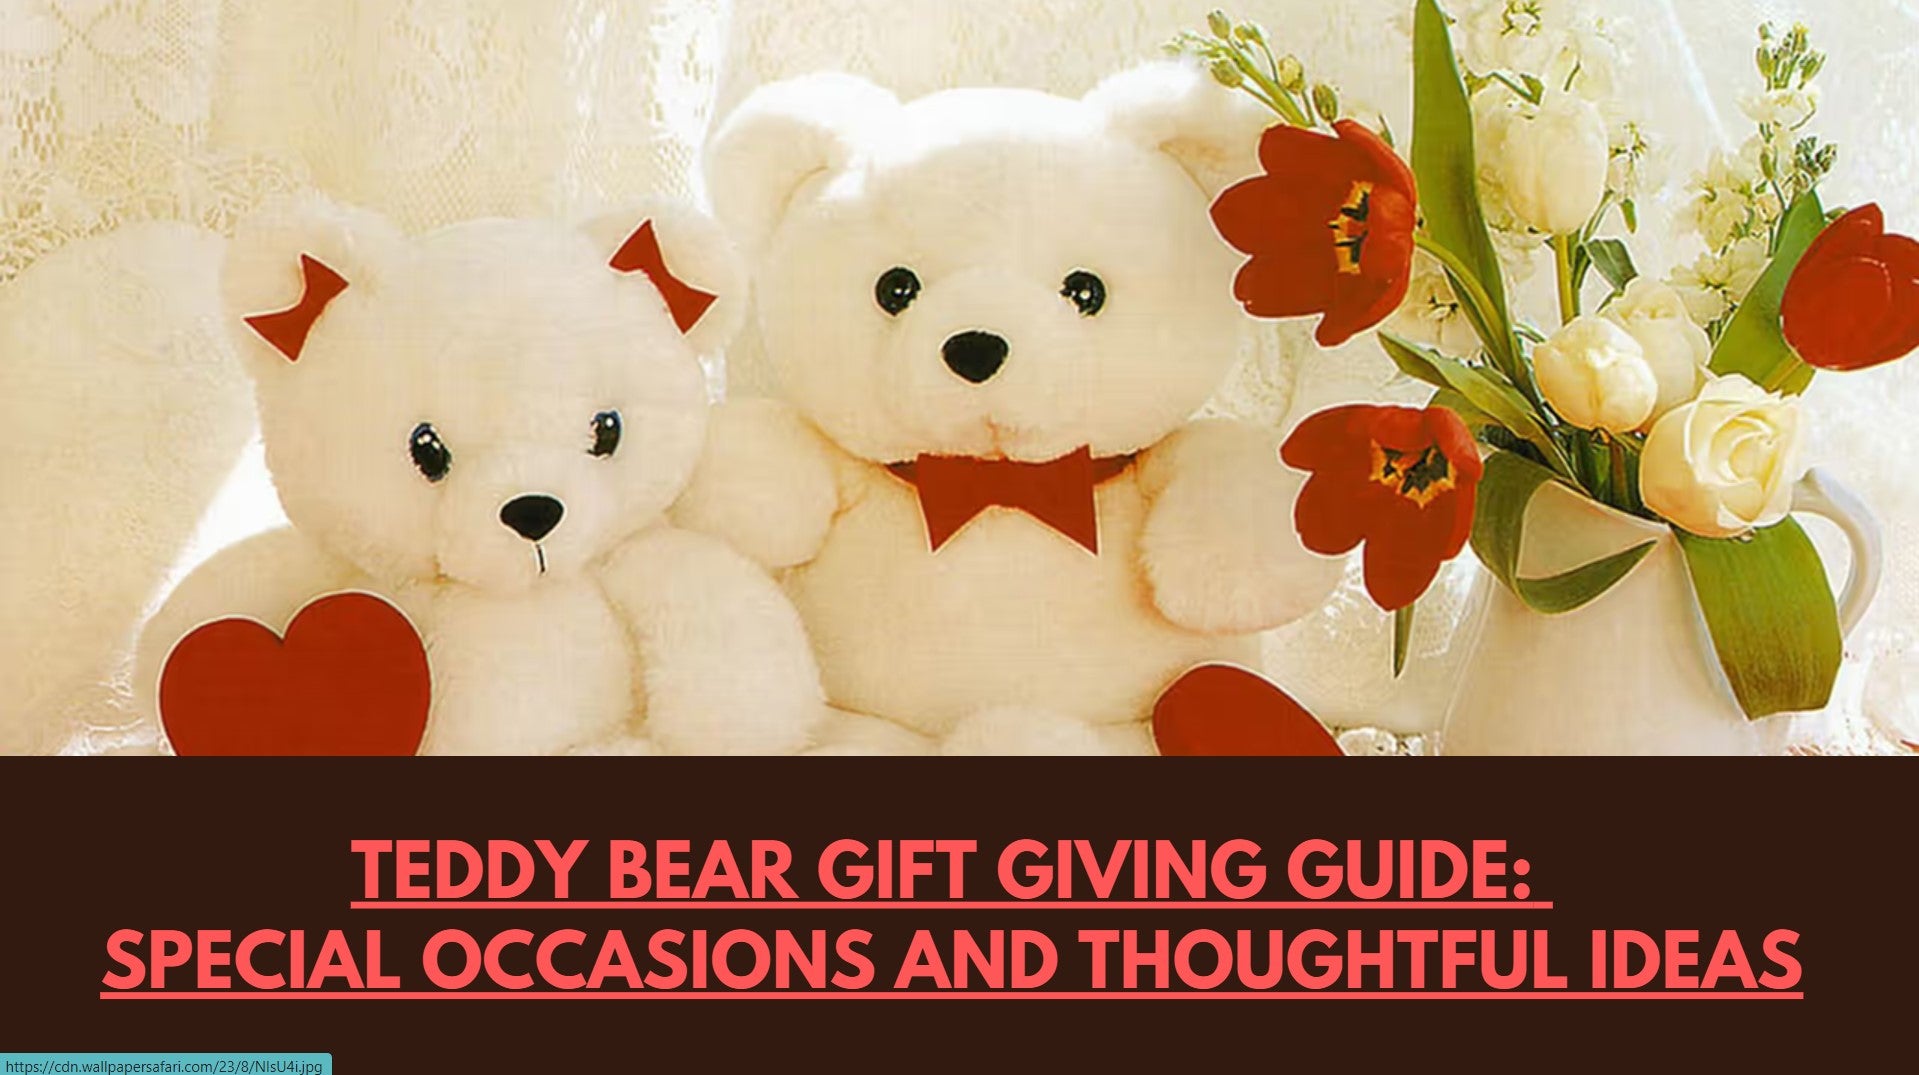 Teddy Bear Gift Giving Guide: Special Occasions and Thoughtful Ideas